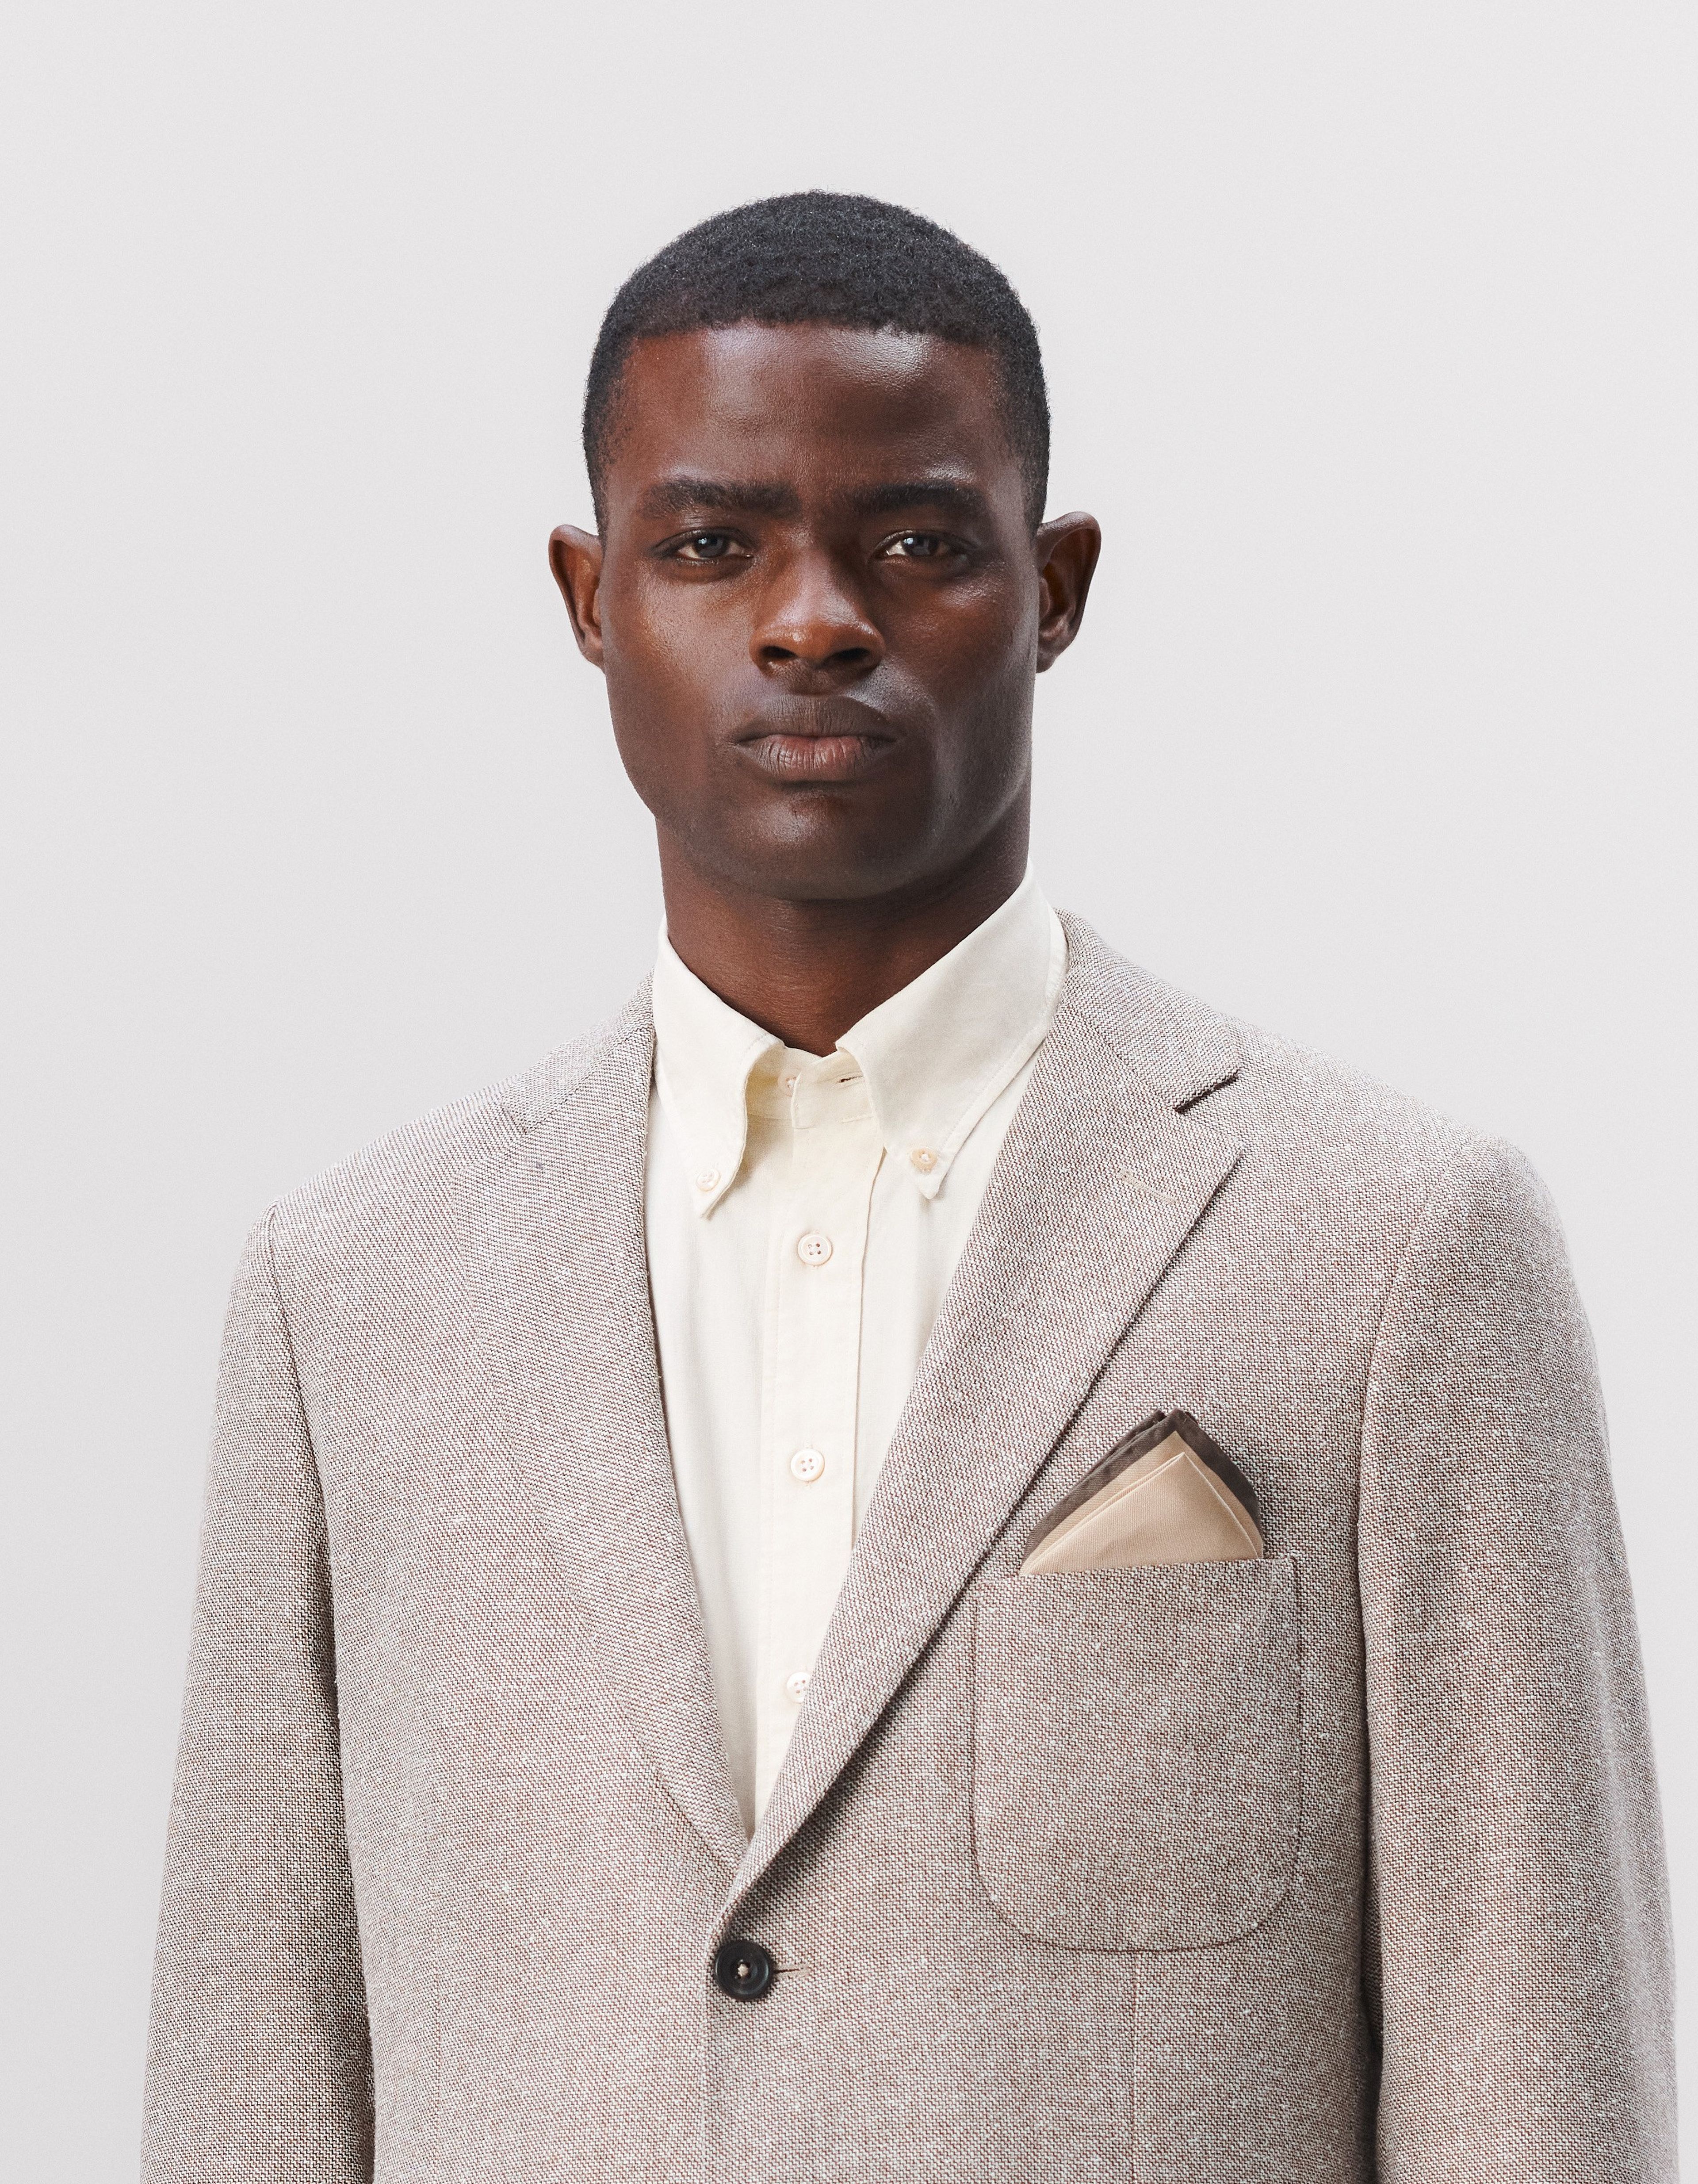 A man wearing a button down collar shirt with a beige suit jacket, styled with pocket squares